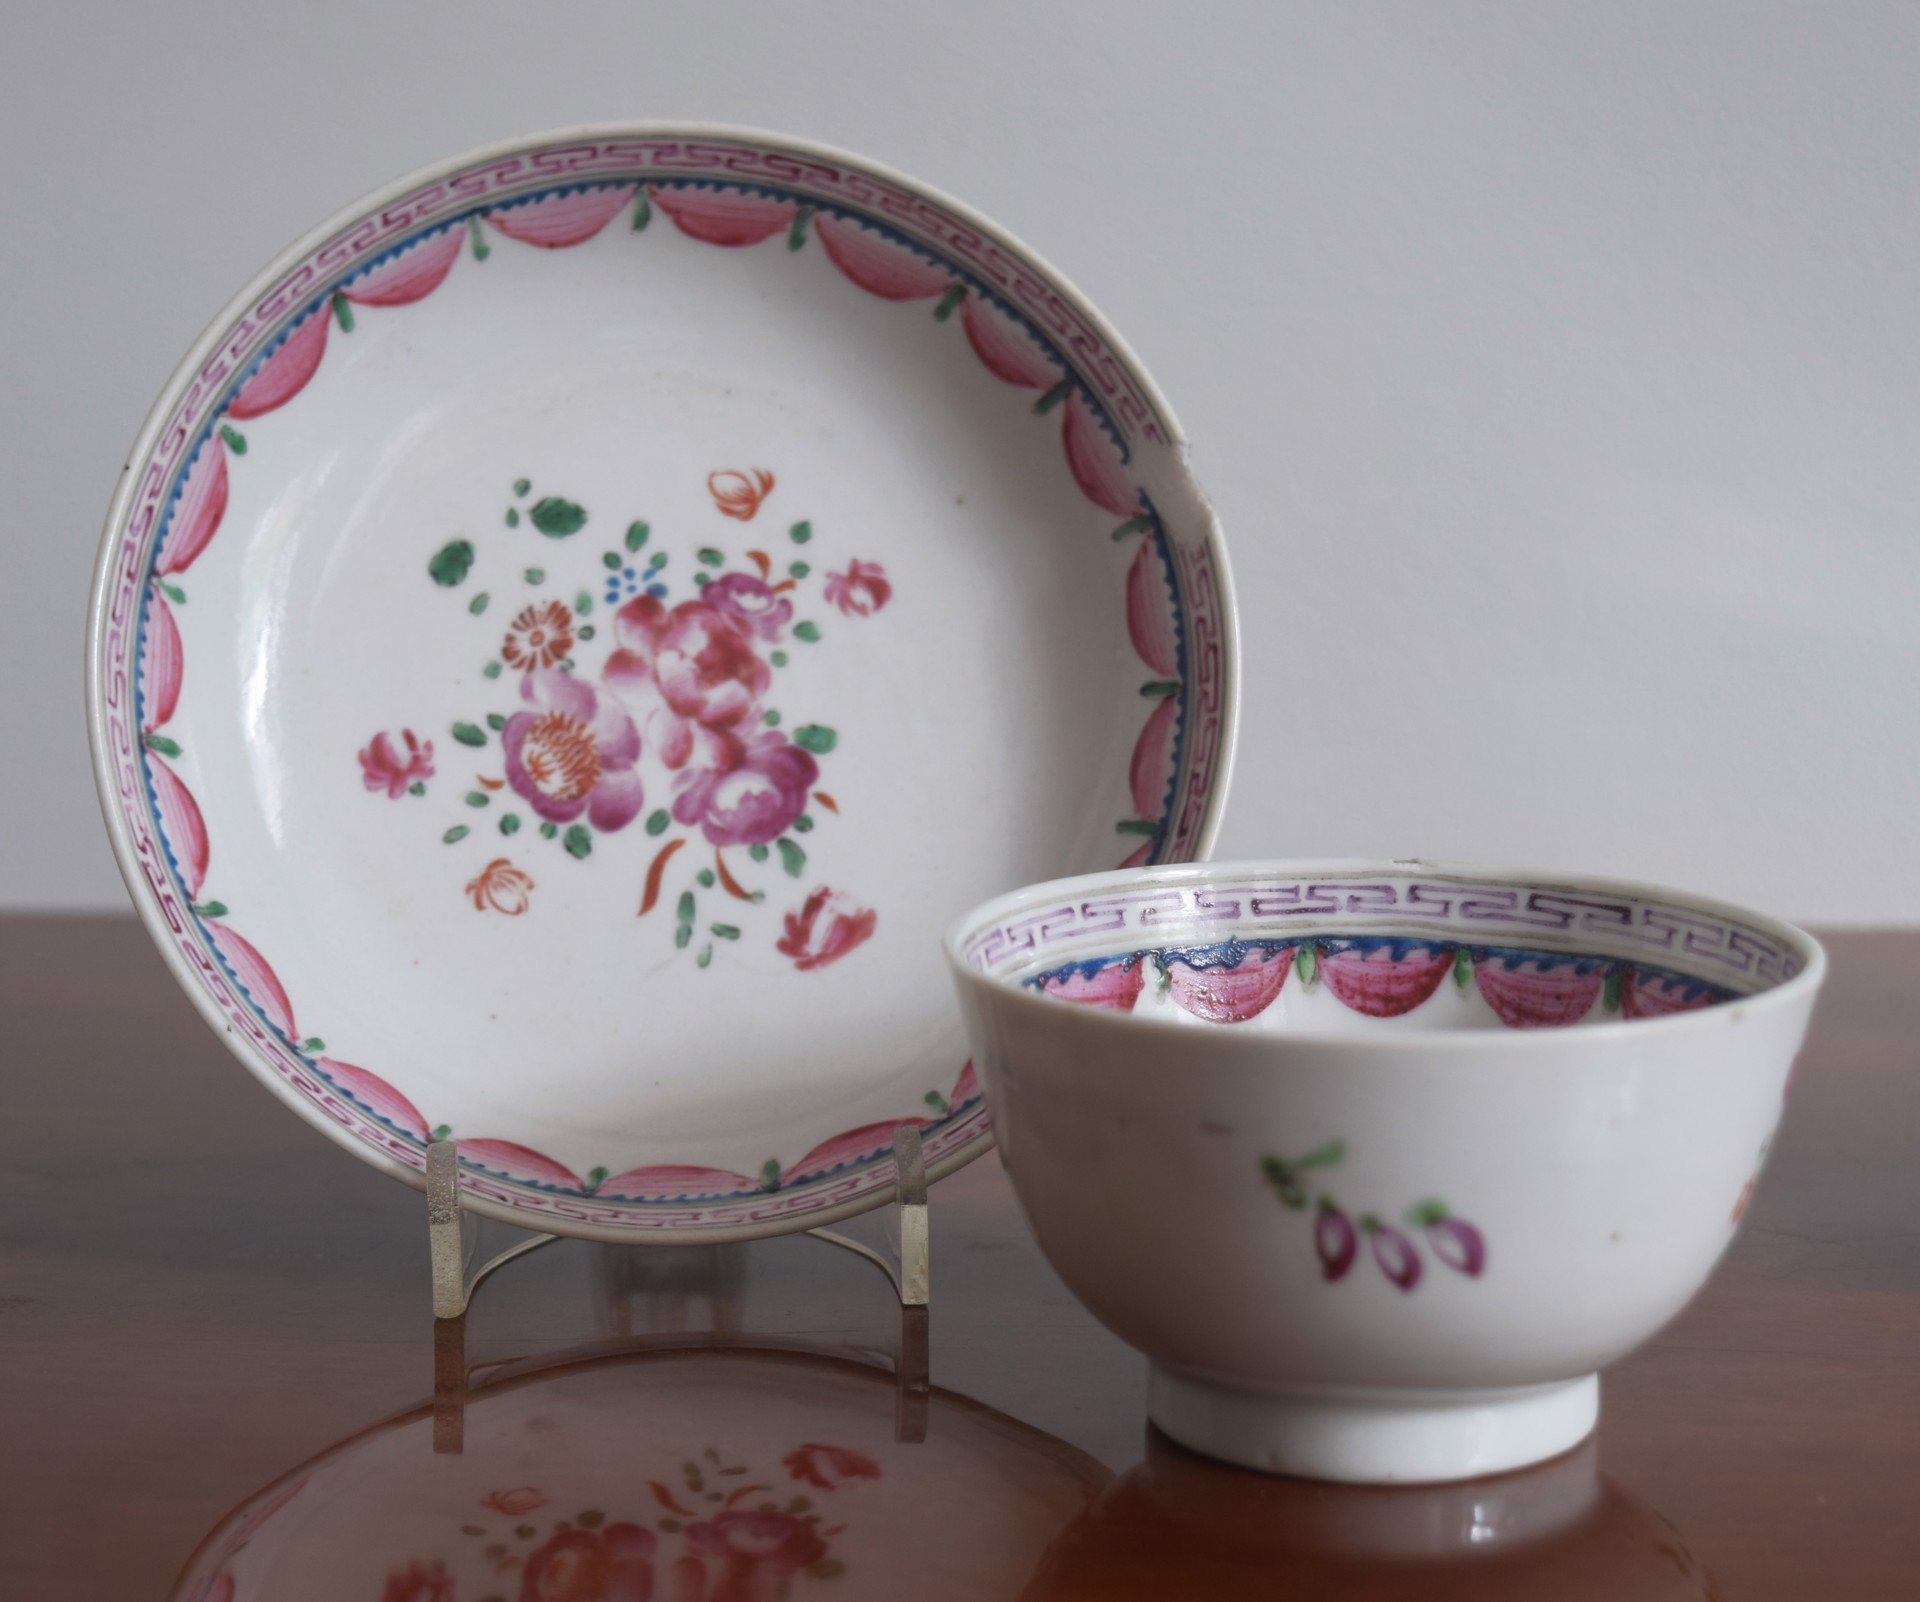 A FAMILLE-ROSE CUP AND SAUCER IN THE ENGLISH STYLE